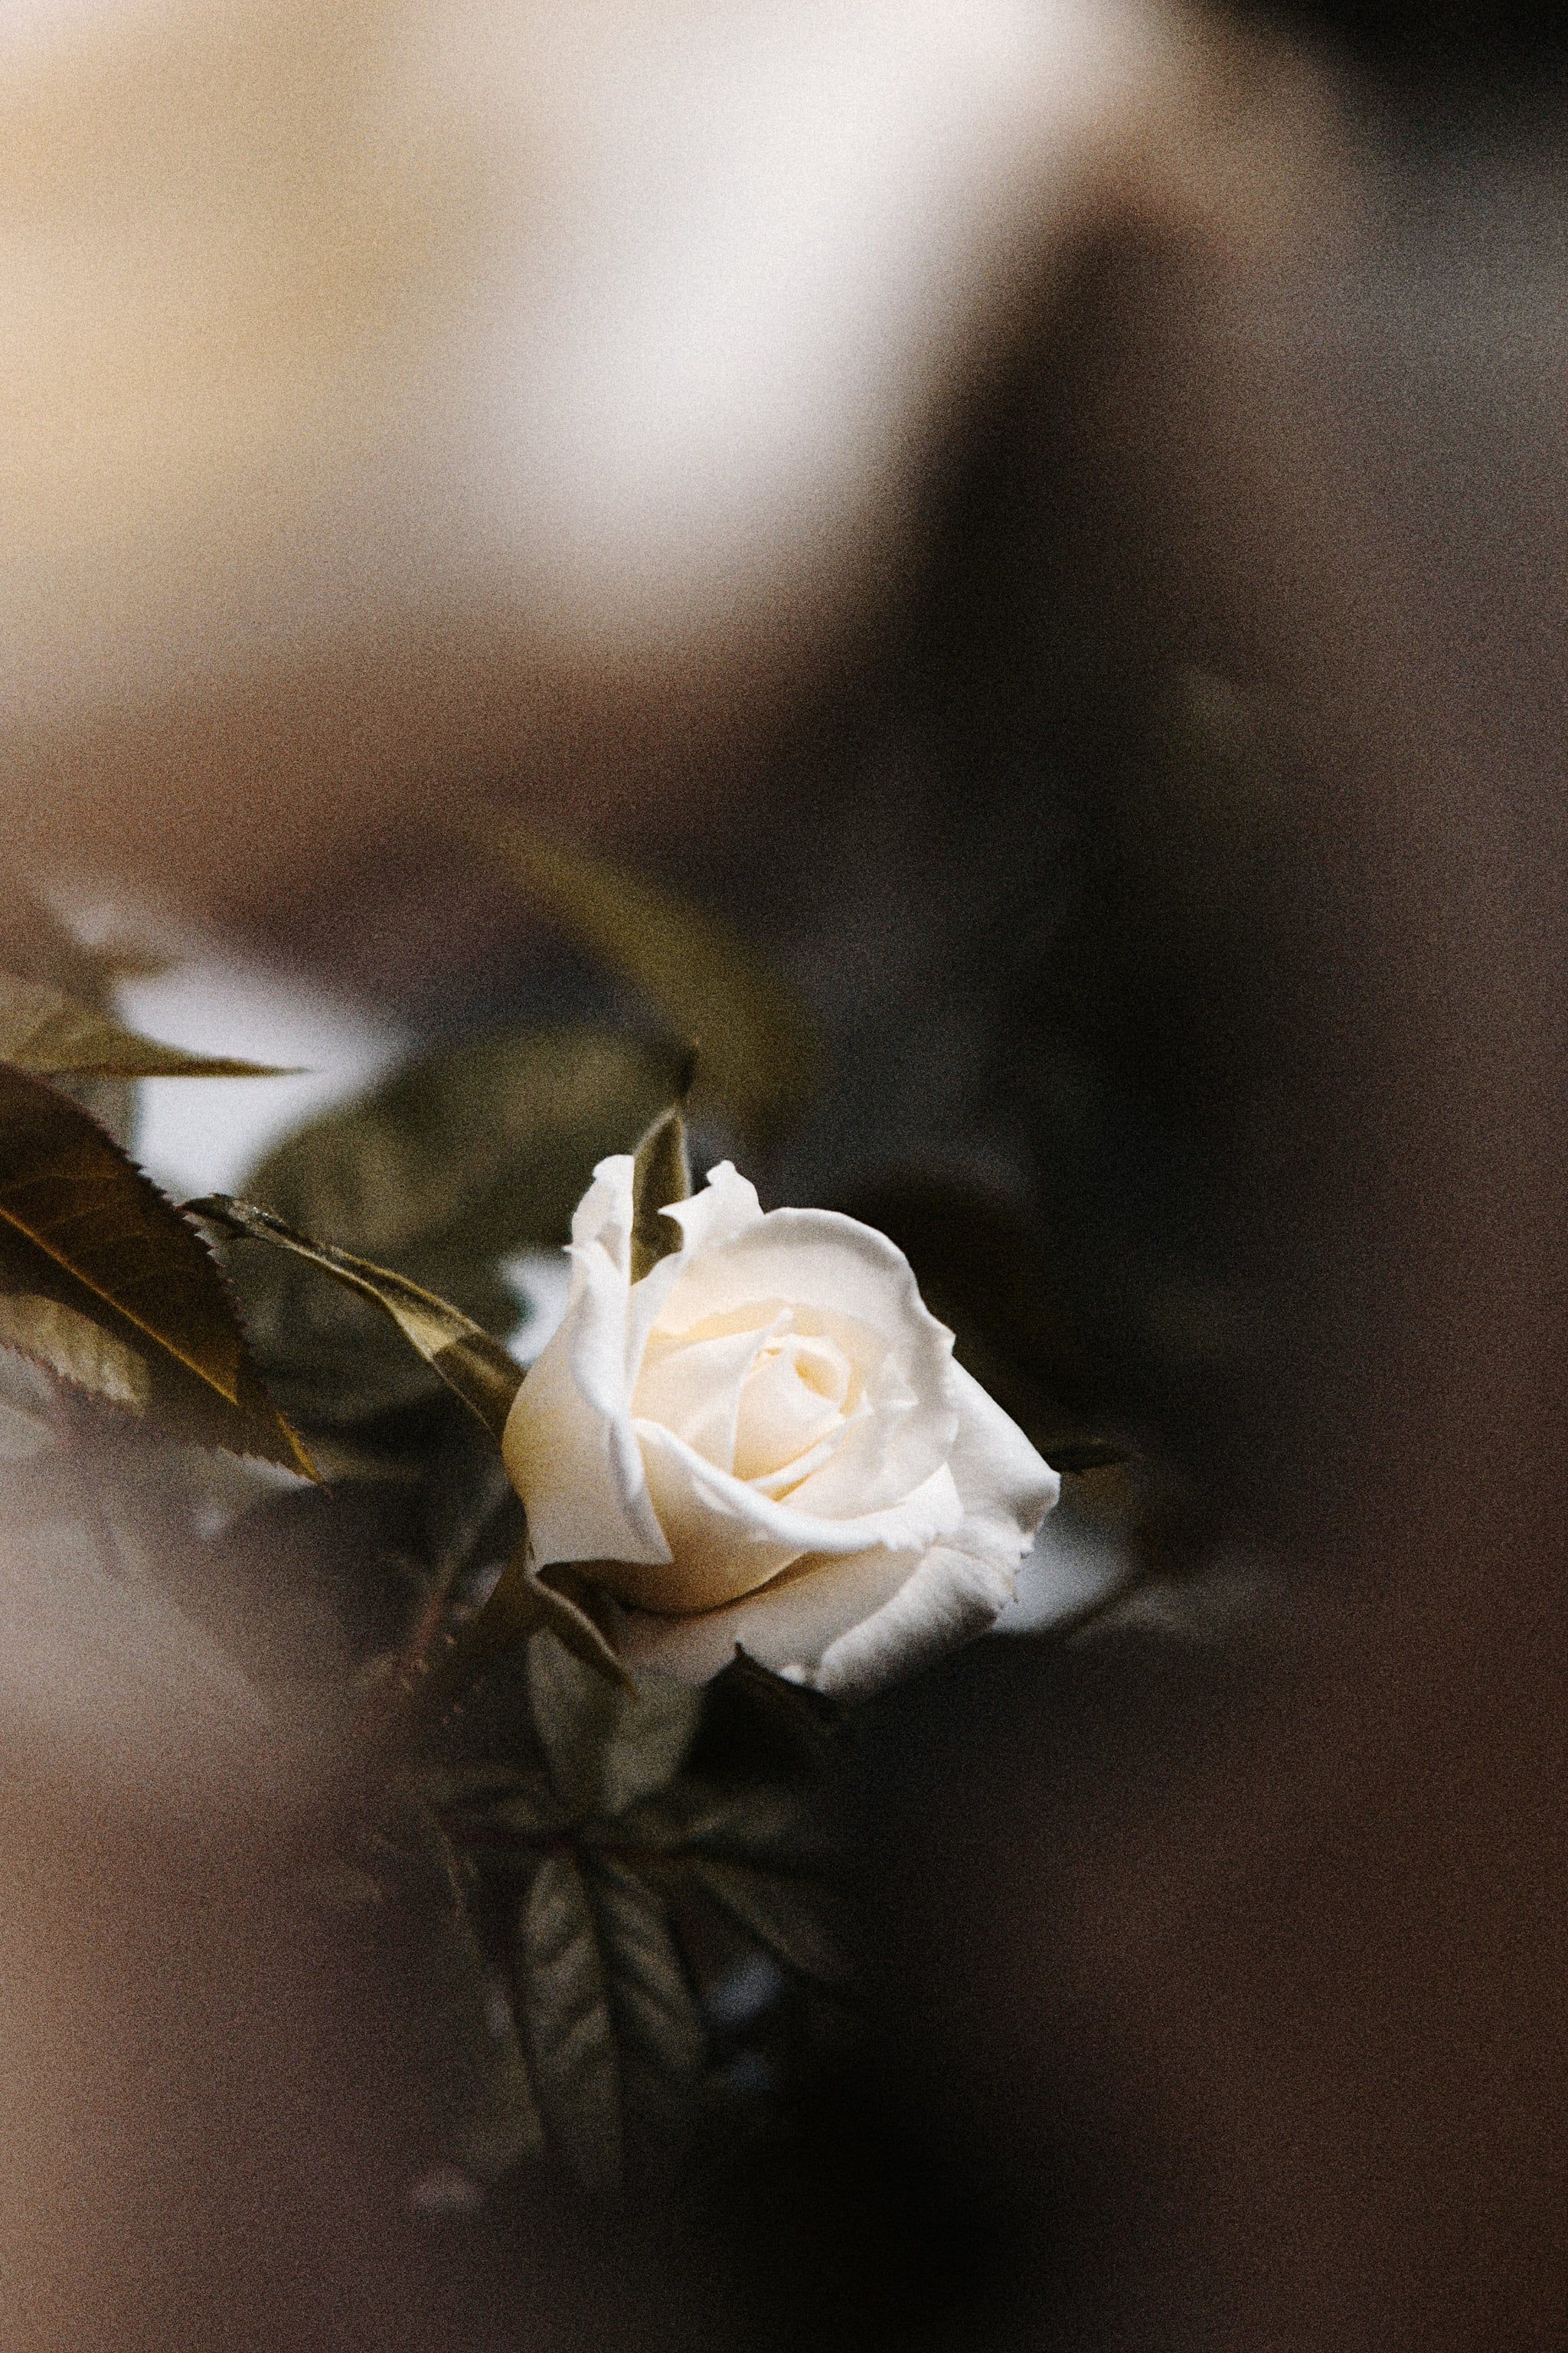 A single white rose with green leaves. - Photography, roses